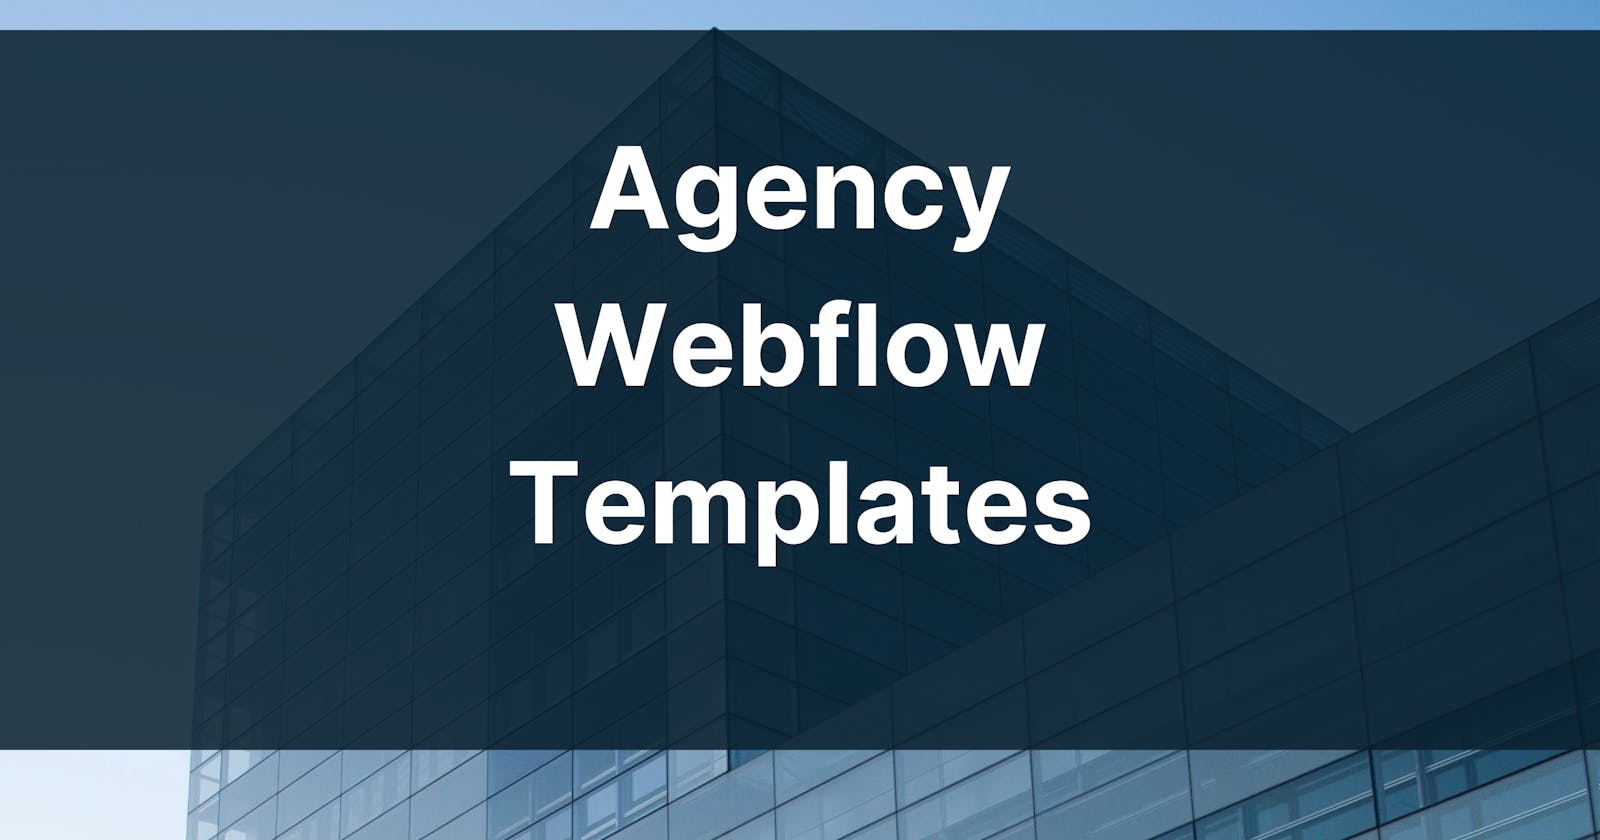 7 Top-Performing Webflow Templates for Your Agency Website